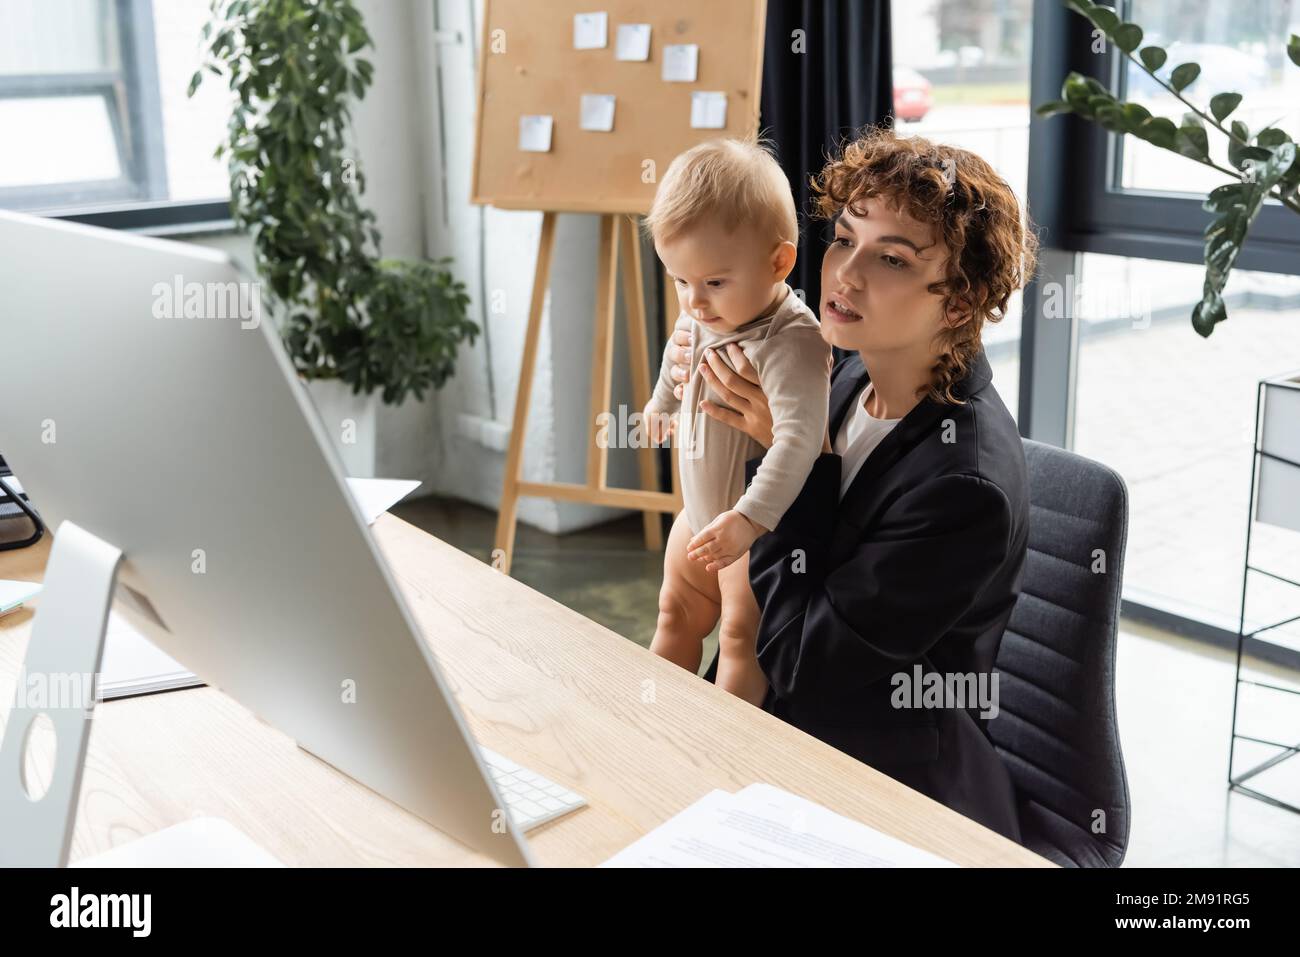 businesswoman in black blazer holding baby and looking at computer monitor in office,stock image Stock Photo